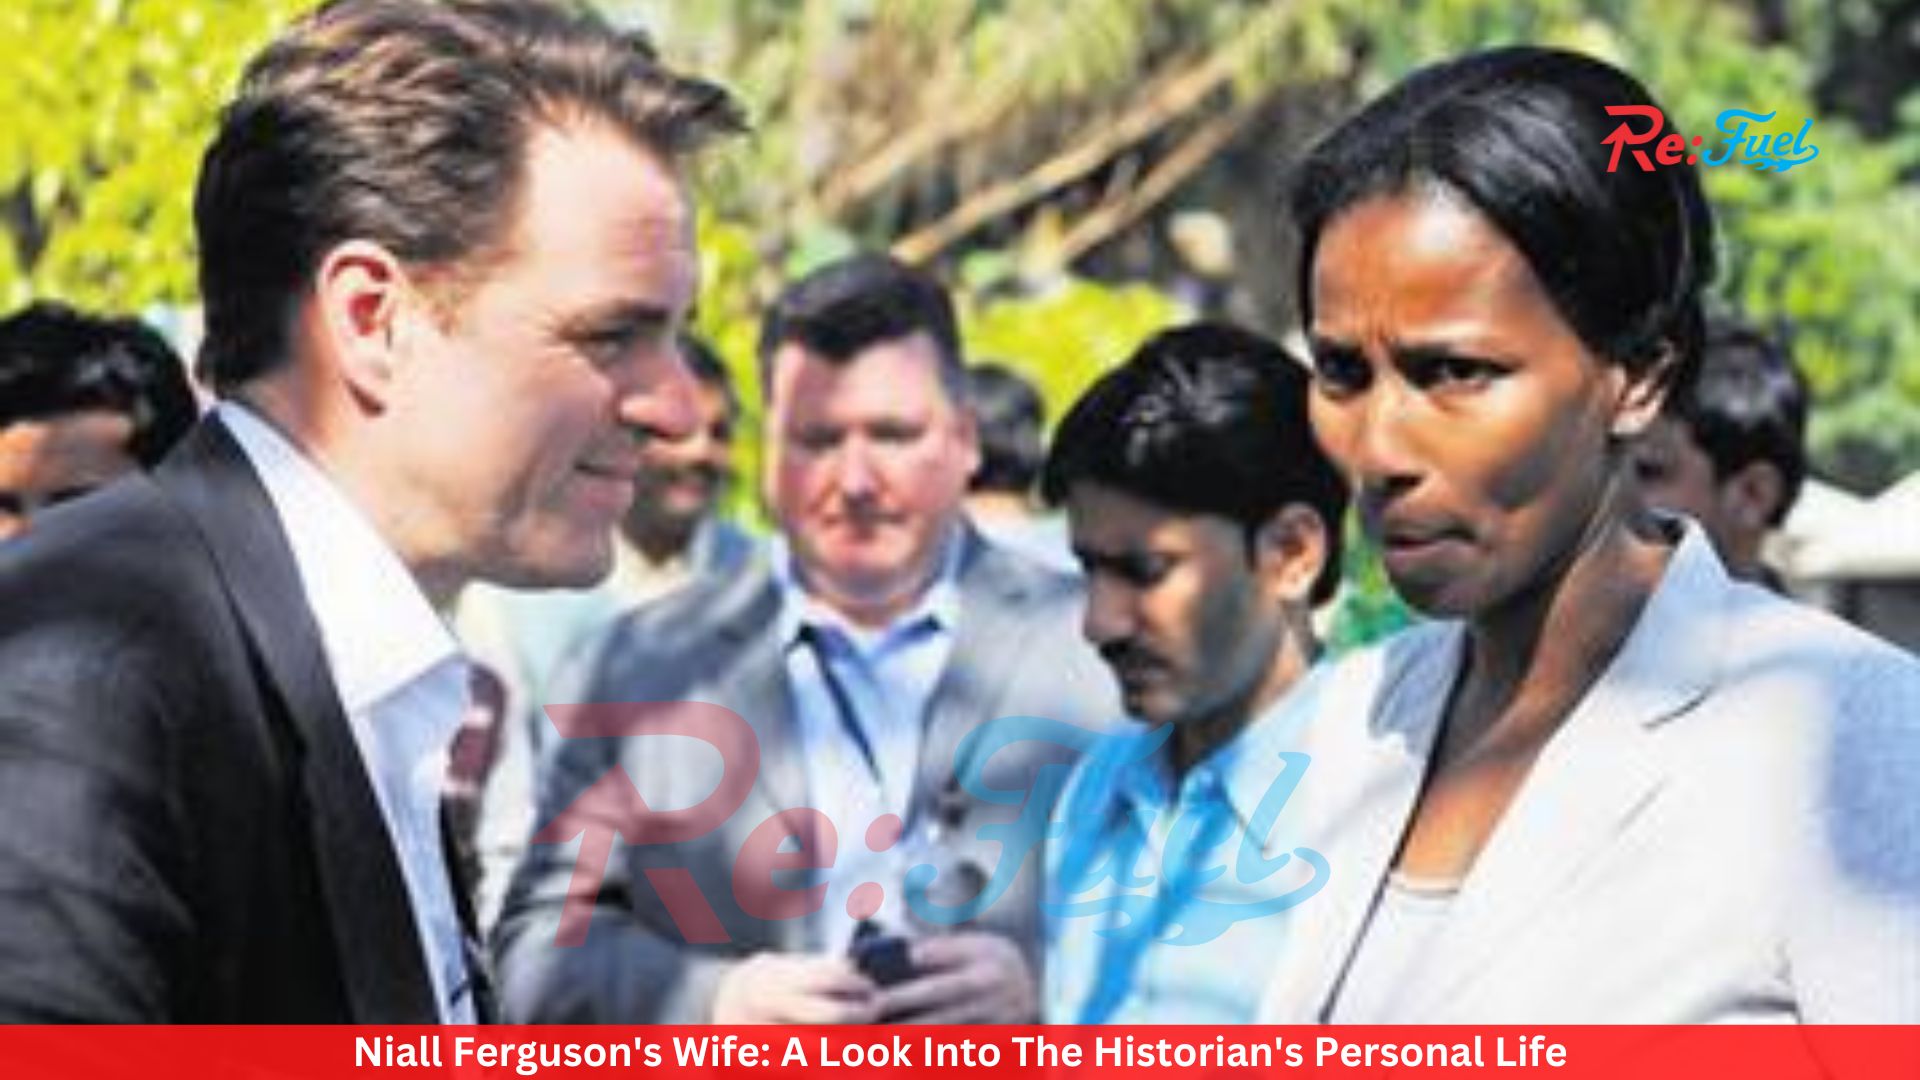 Niall Ferguson's Wife: A Look Into The Historian's Personal Life